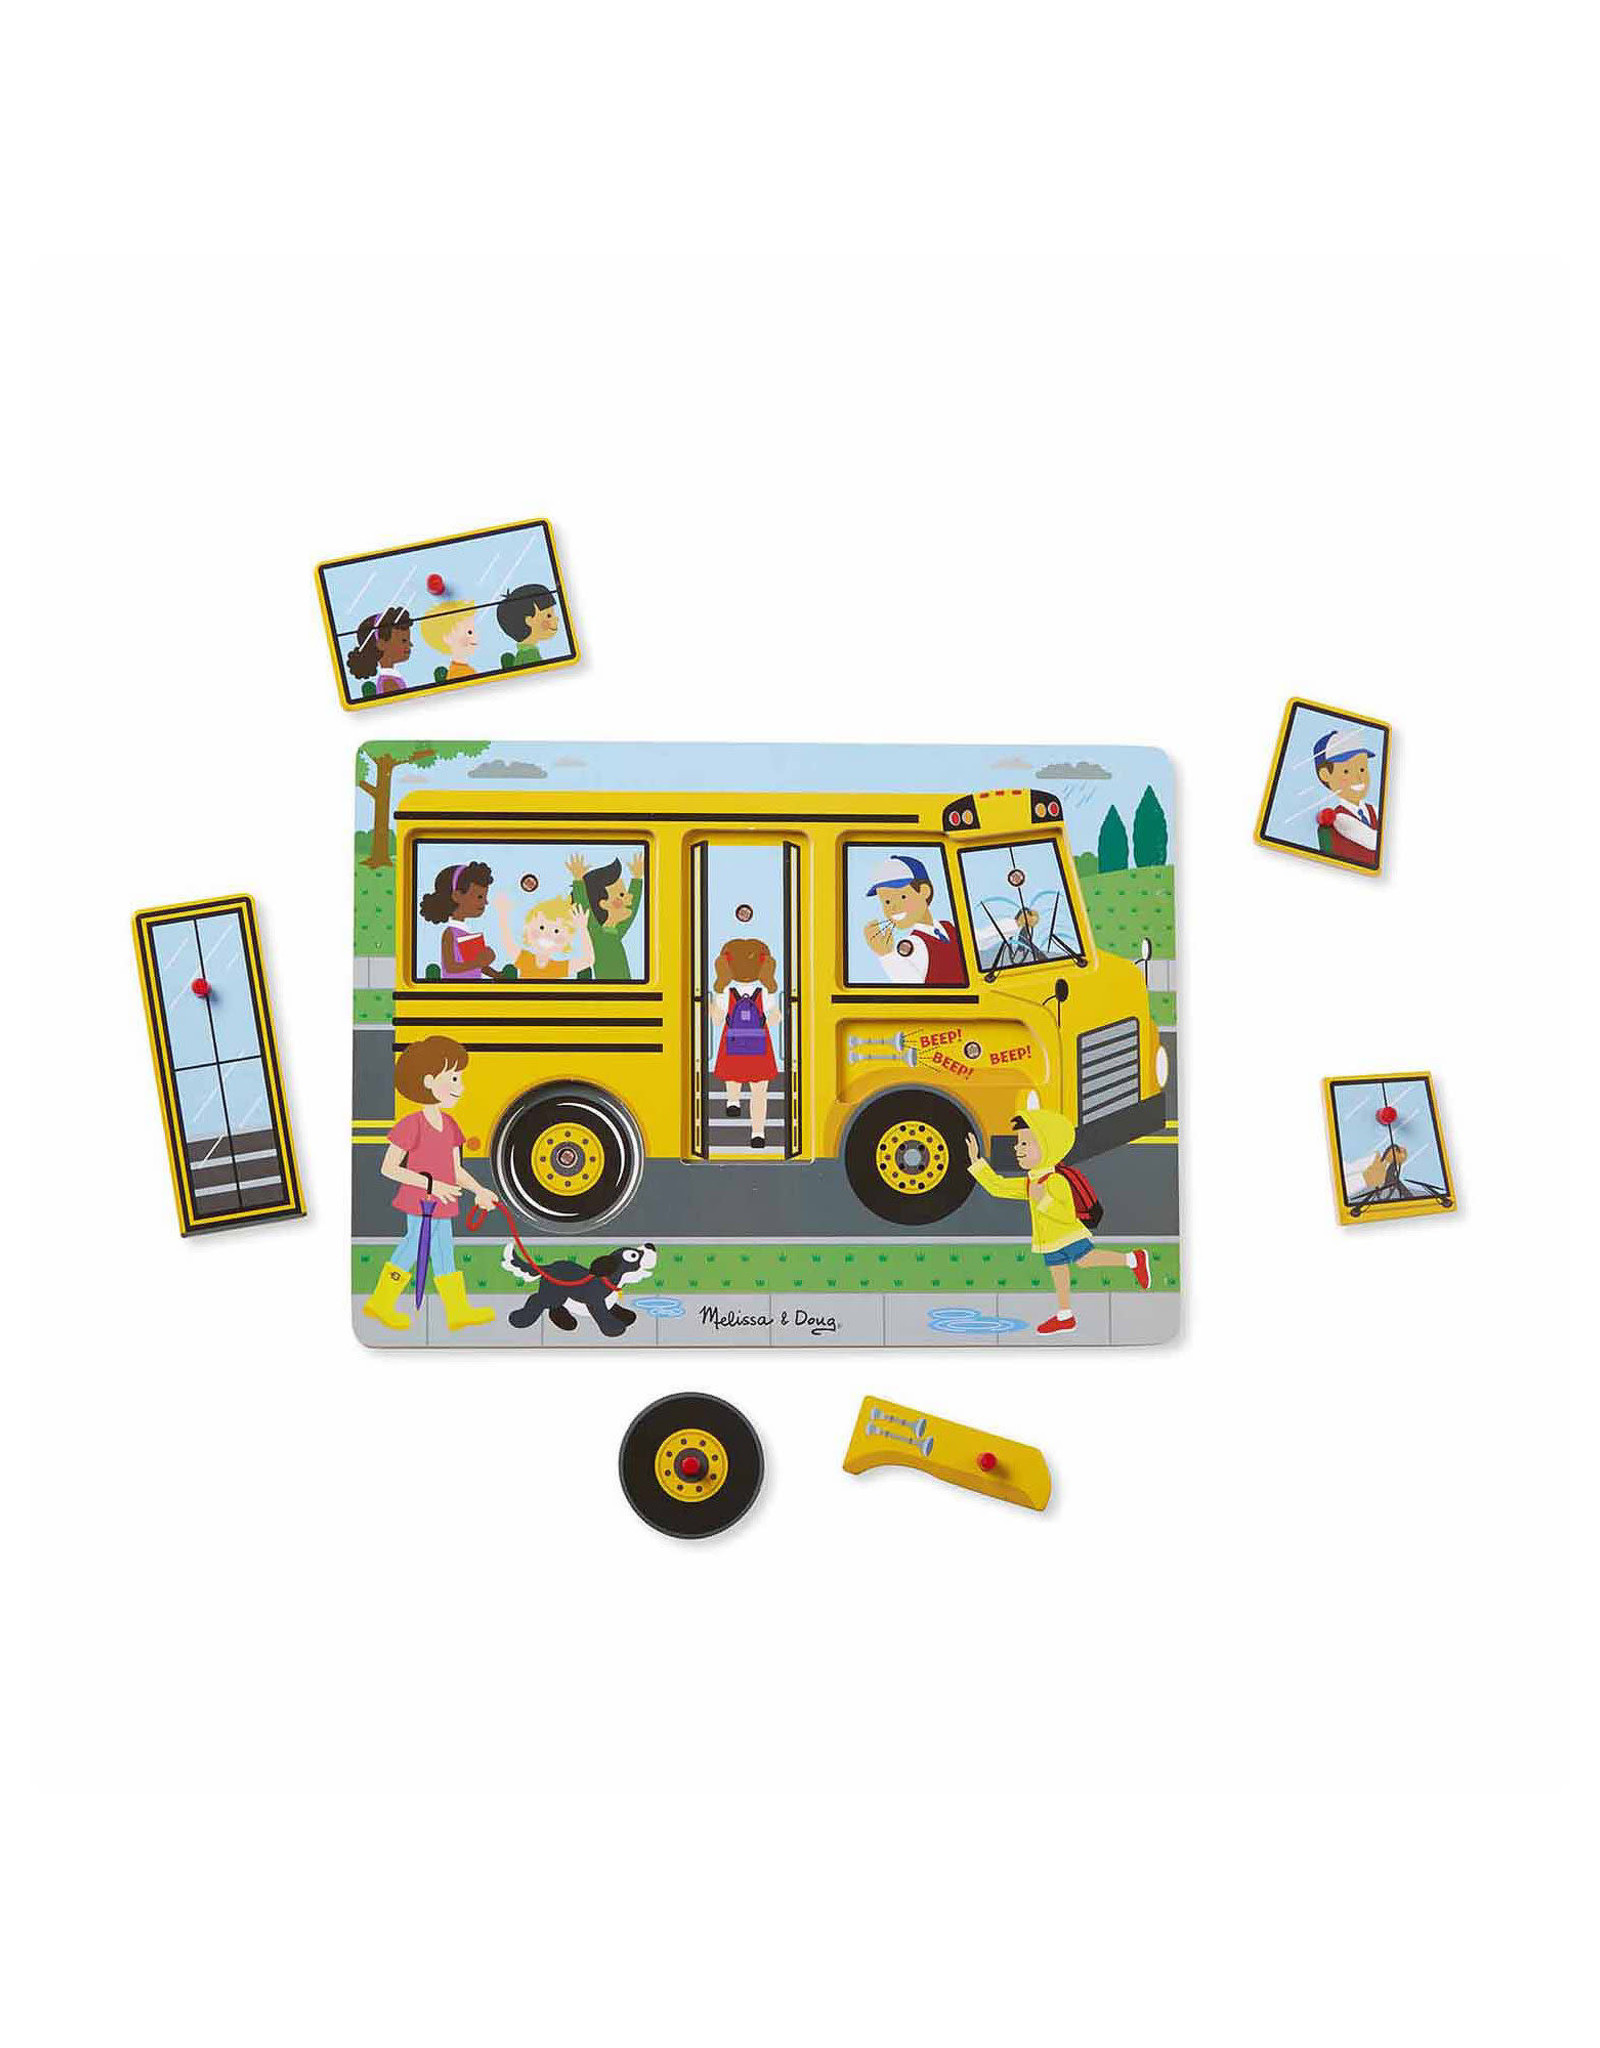 MELISSA & DOUG THE WHEELS ON THE BUS SOUND PUZZLE